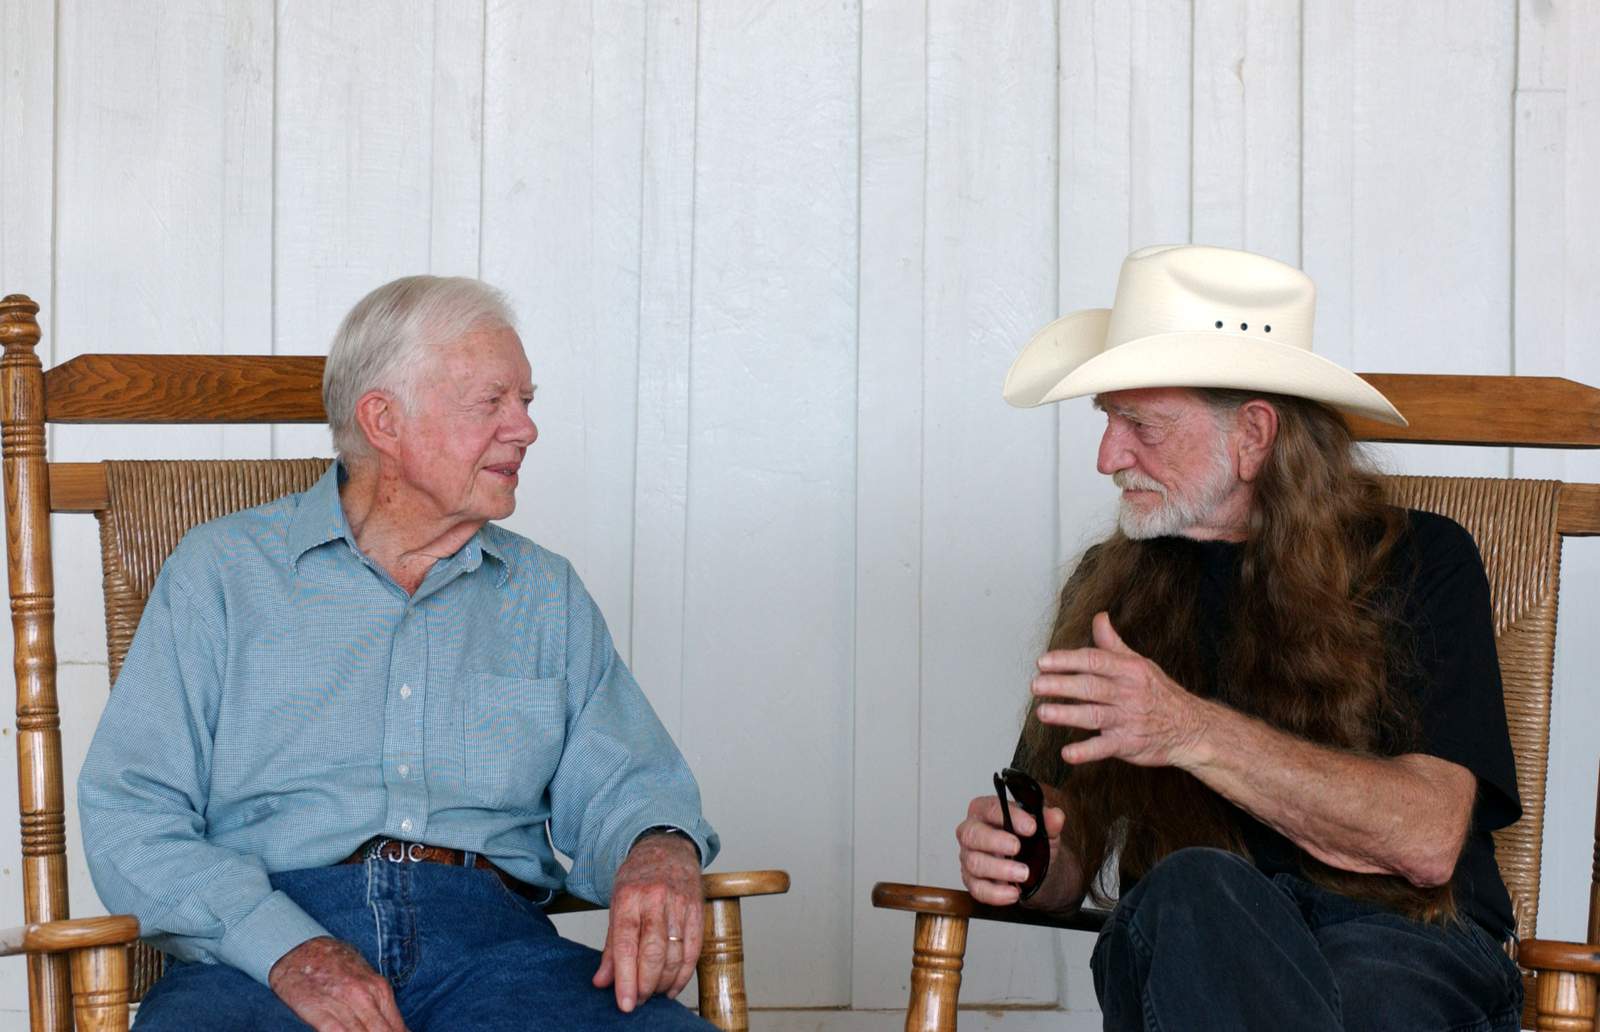 Jimmy Carter says his son smoked with Willie Nelson on the White House roof